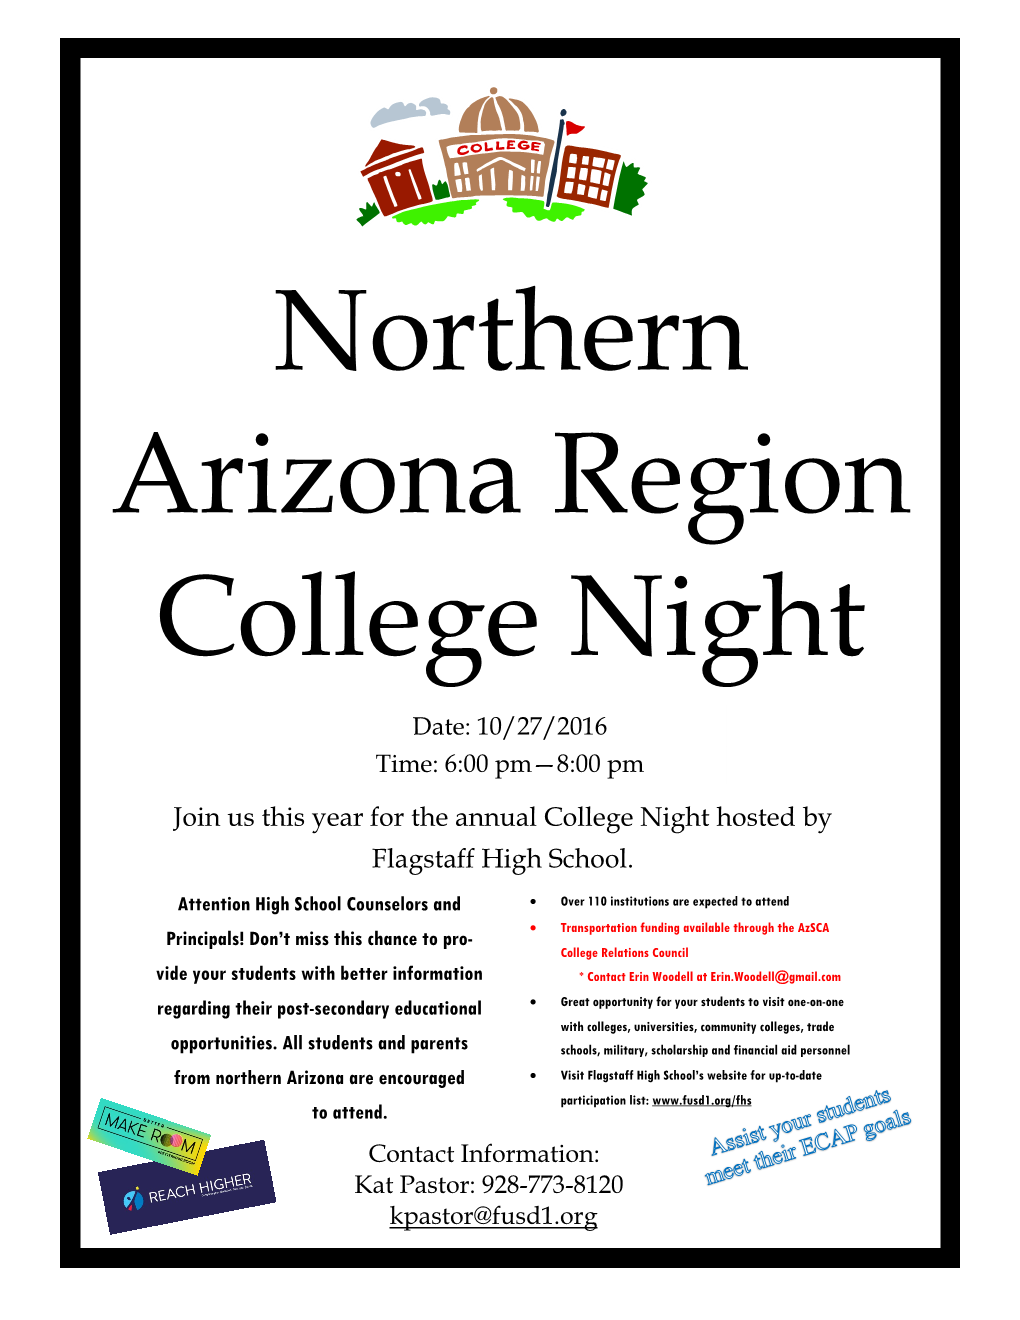 Join Us This Year for the Annual College Night Hosted by Flagstaff High School